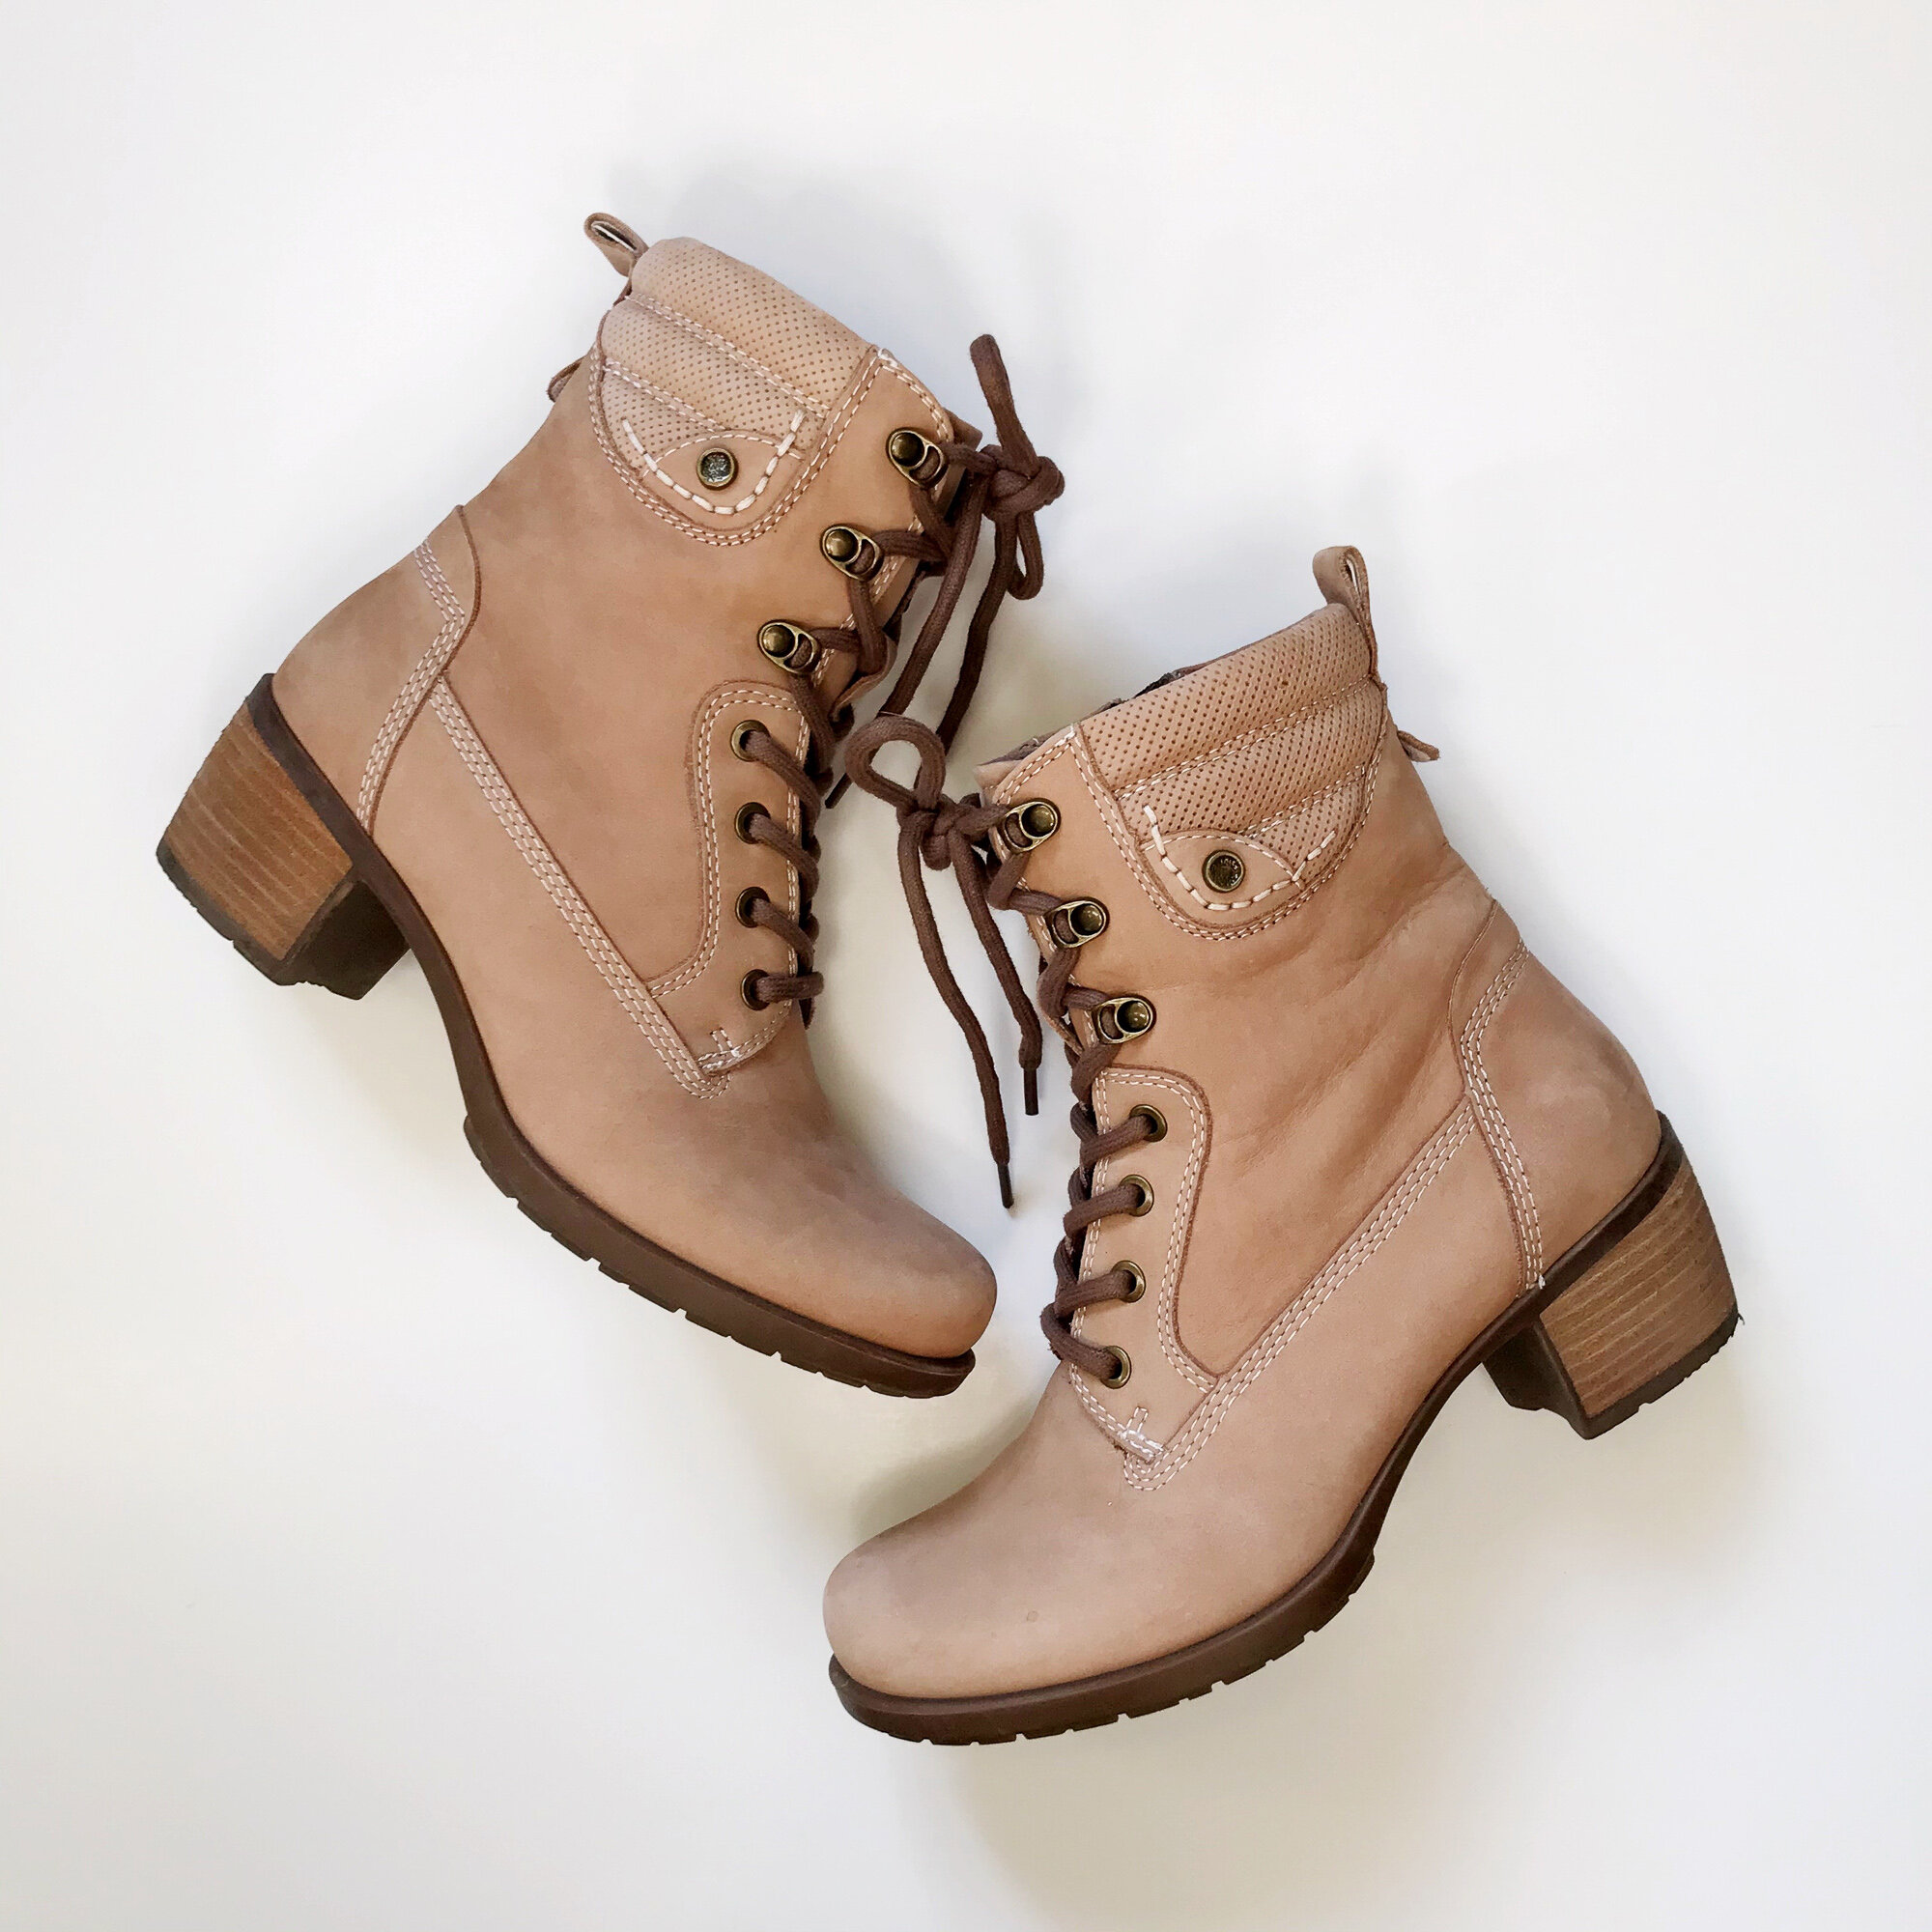 Earth Anchor lace-up boot review and outfit ideas — Cotton Cashmere Cat Hair